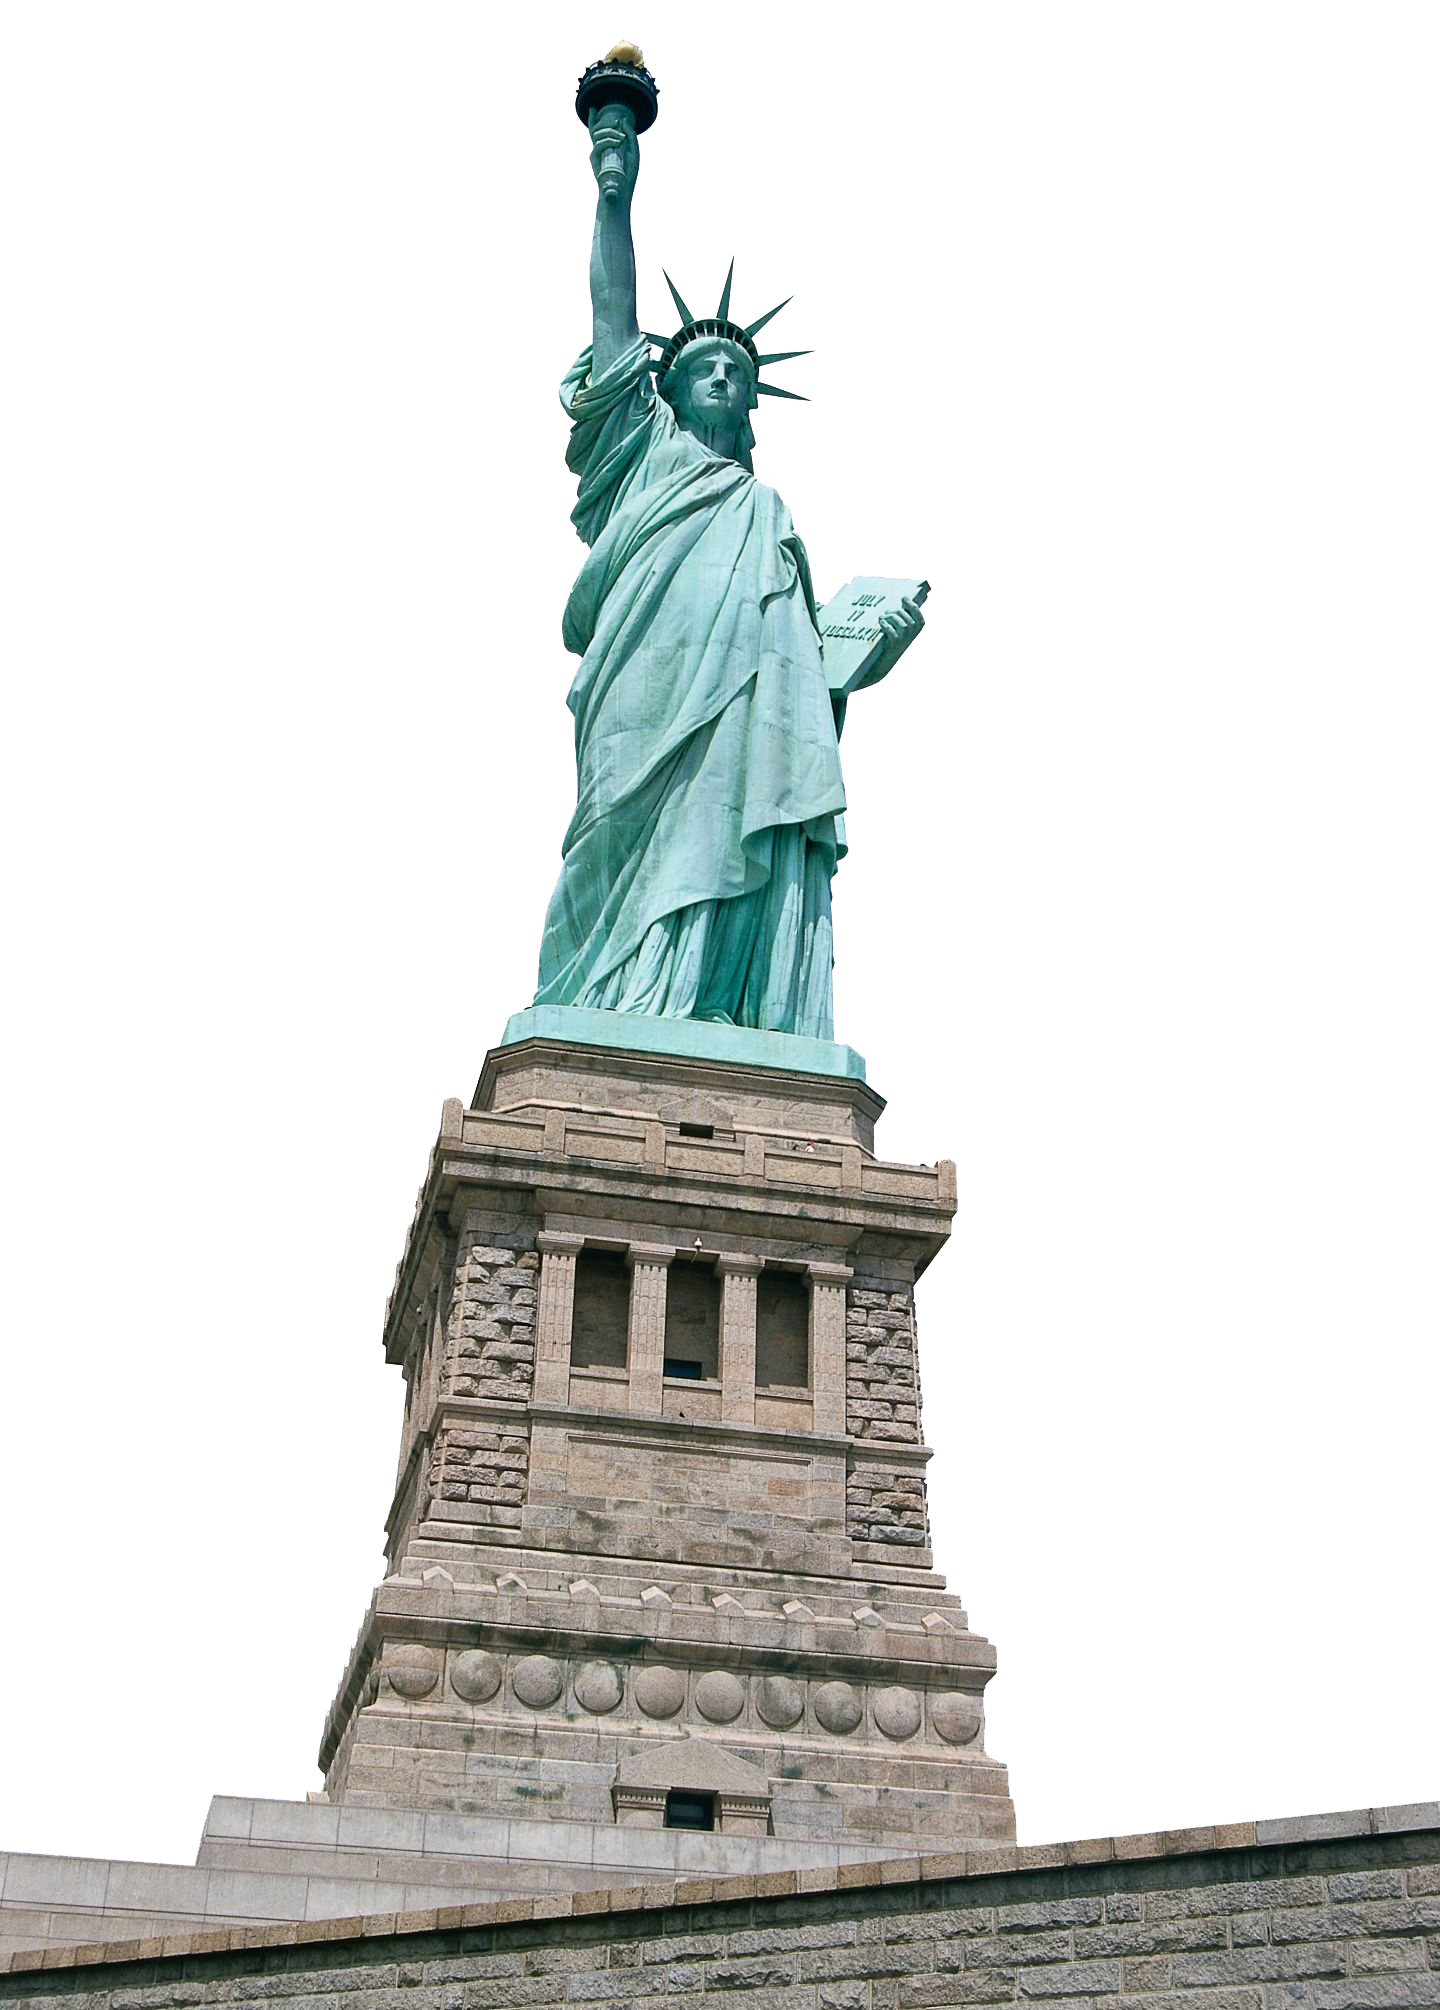 Clip Arts Related To : statue of liberty animated. view all Statue Of...